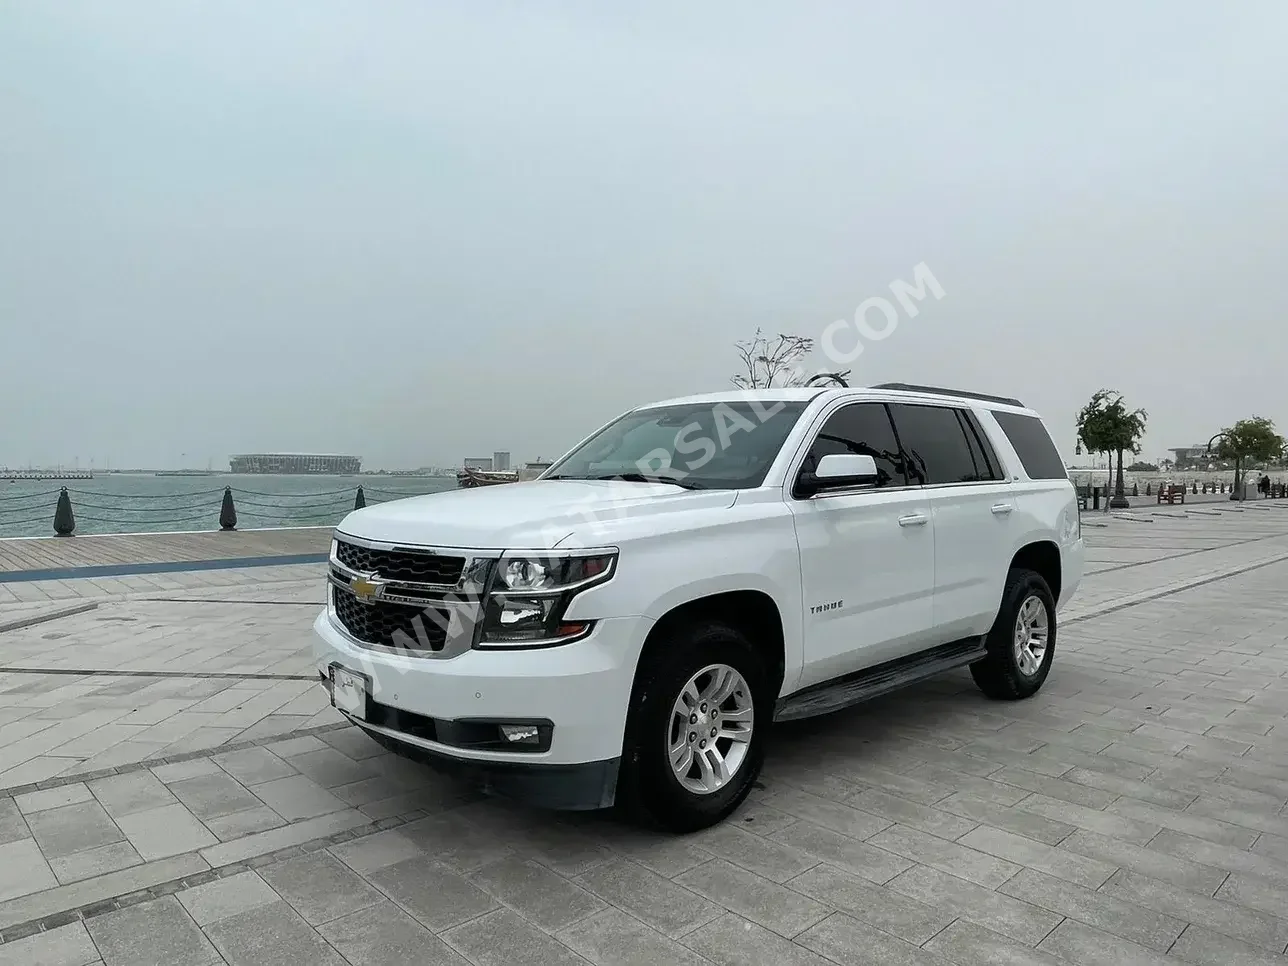 Chevrolet  Tahoe  LS  2015  Automatic  259,000 Km  8 Cylinder  Rear Wheel Drive (RWD)  SUV  White